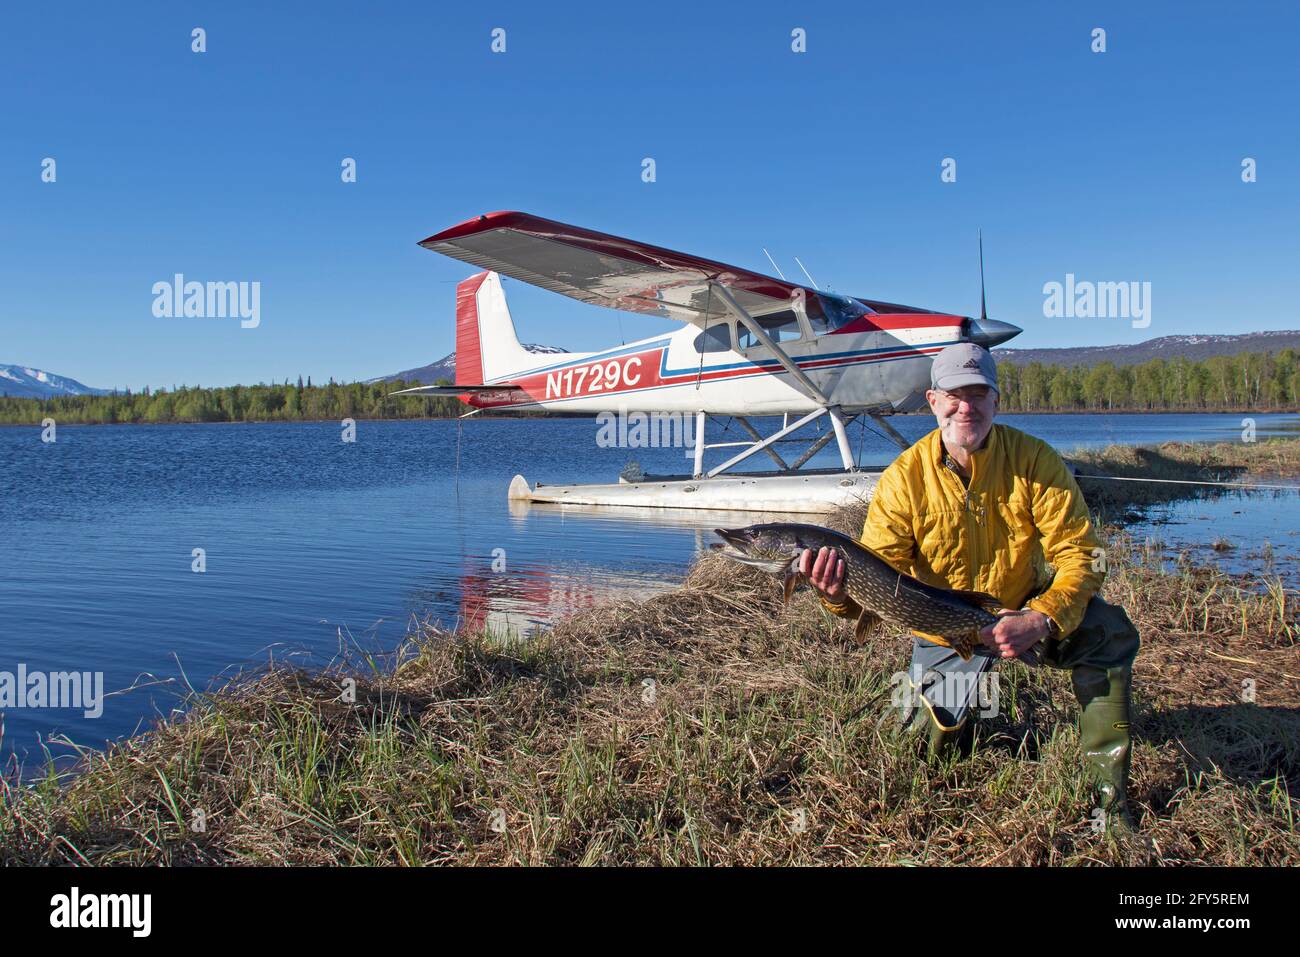 Backed by his private airplane, an angler from Anchorage displays a large northern pike caught in a remote lake in Alaska's Susitna Valley. Stock Photo